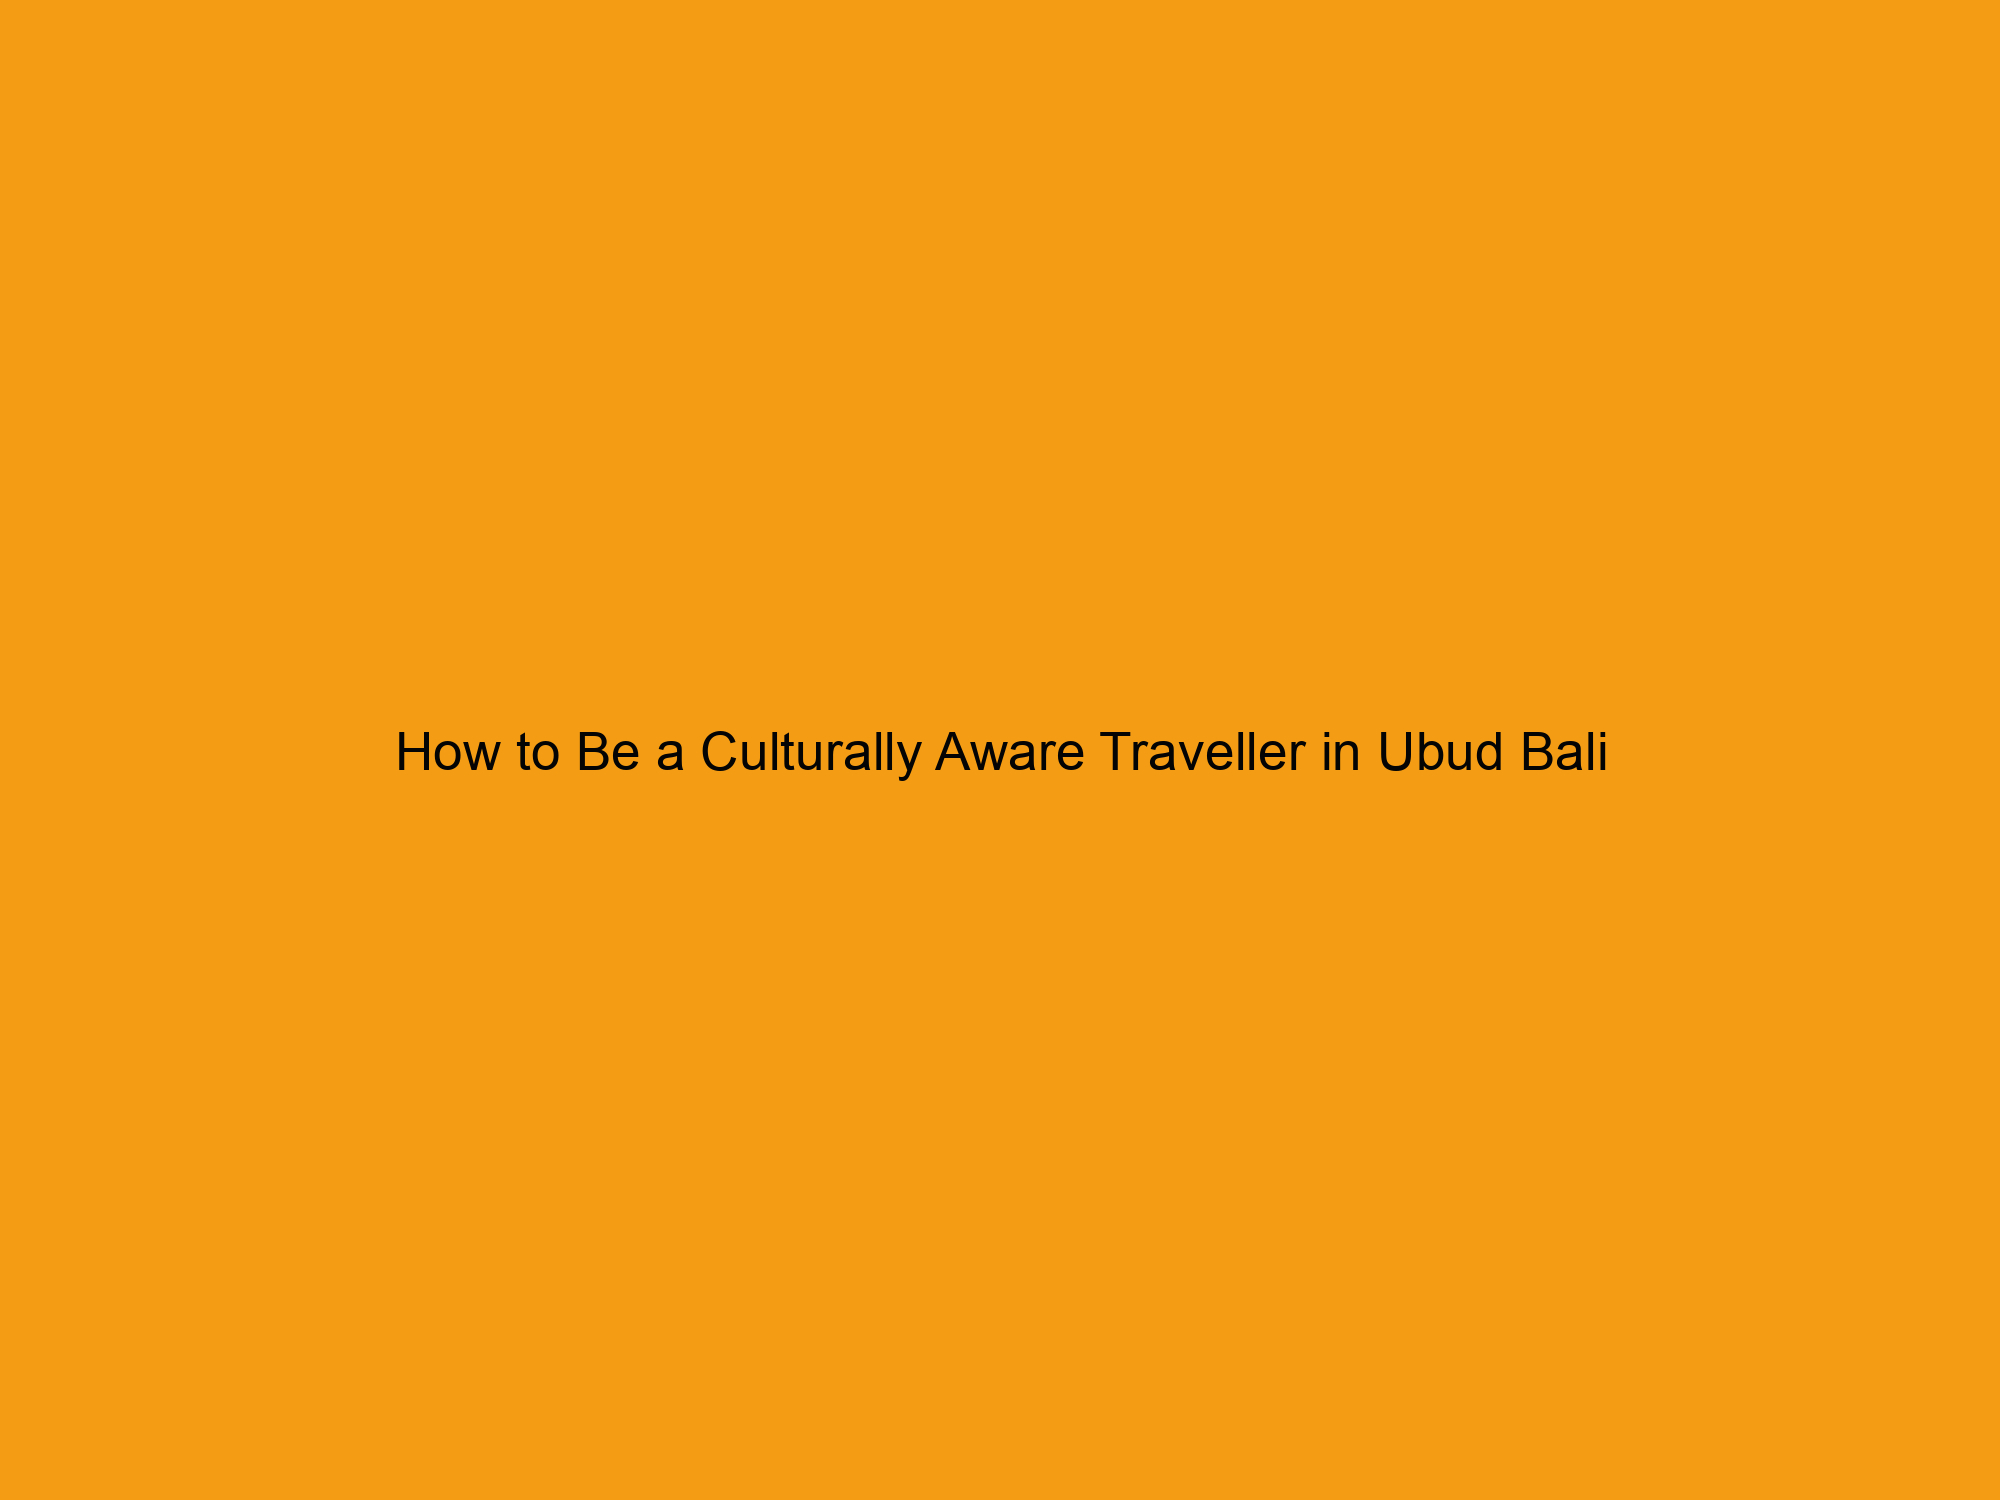 How to Be a Culturally Aware Traveller in Ubud Bali